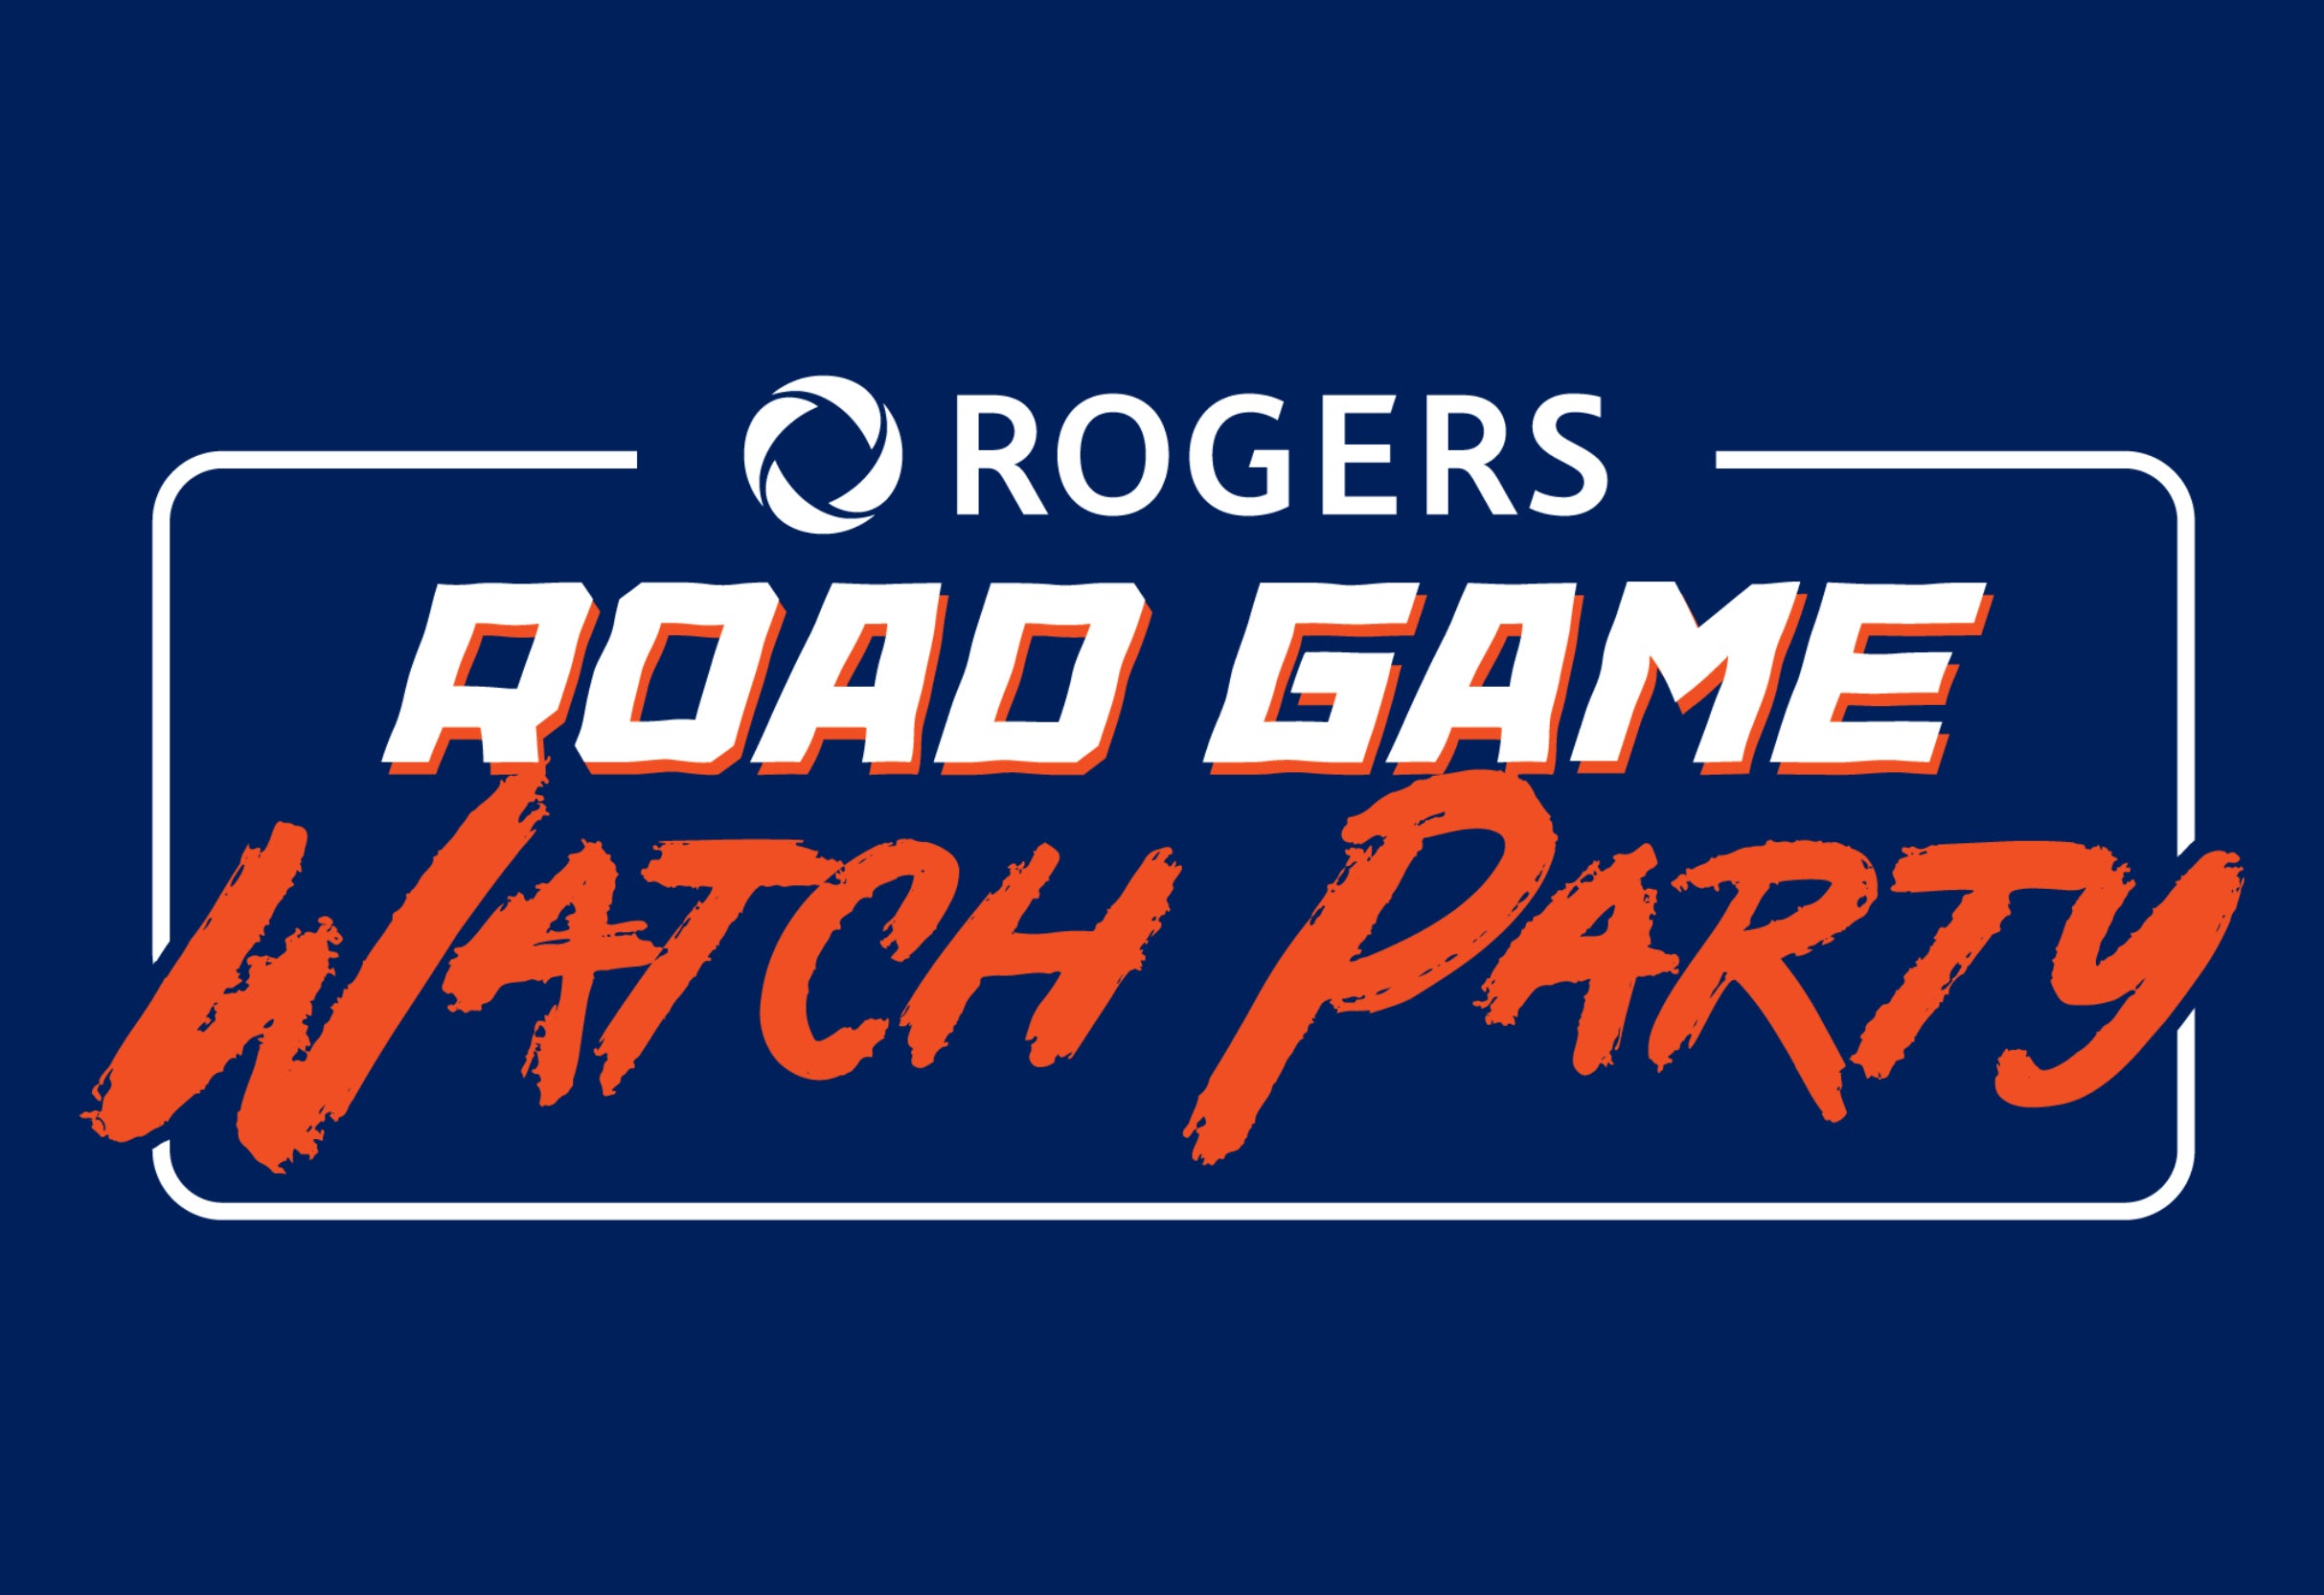 Oilers Road Game Watch Party - Edmonton Oilers v. Canucks in Edmonton promo photo for Rogers presale offer code